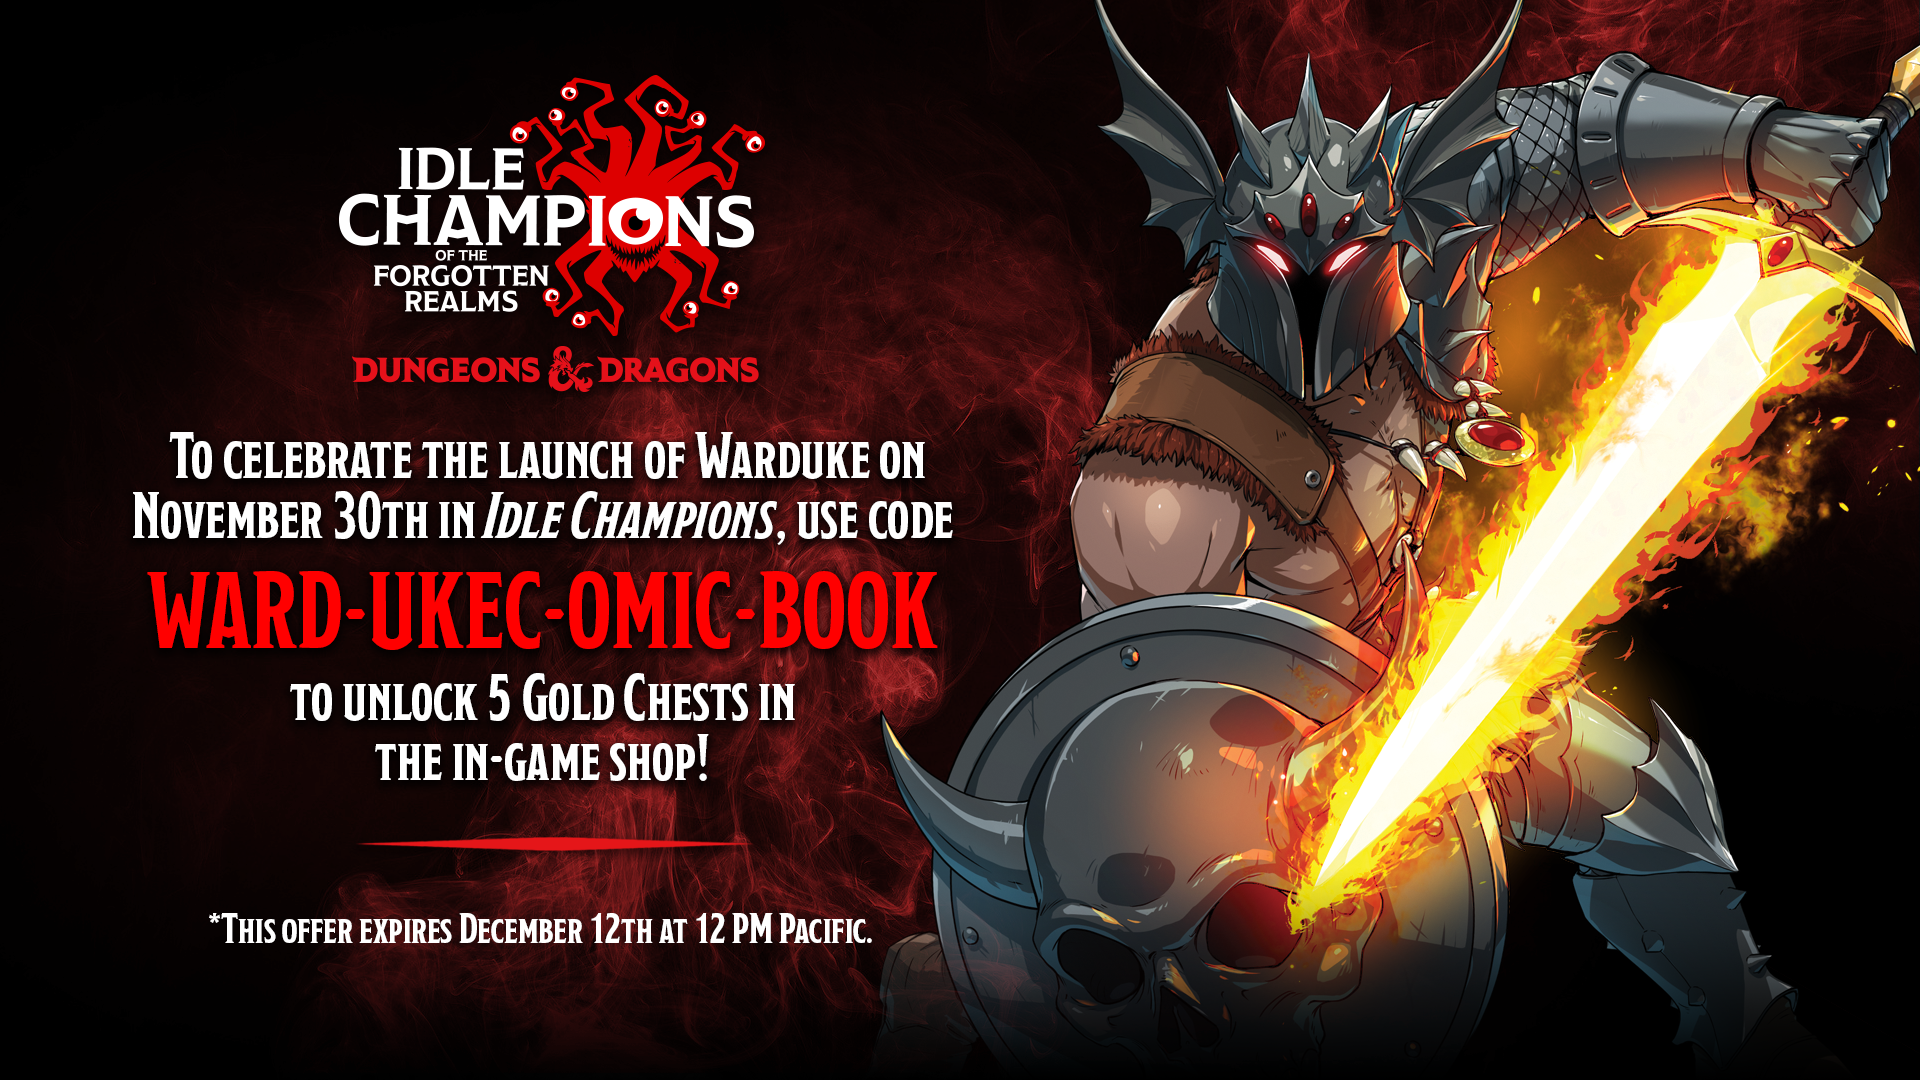 tilpasningsevne momentum tiggeri Idle Champions of the Forgotten Realms Adds Warduke as Next Champion  (Exclusive)